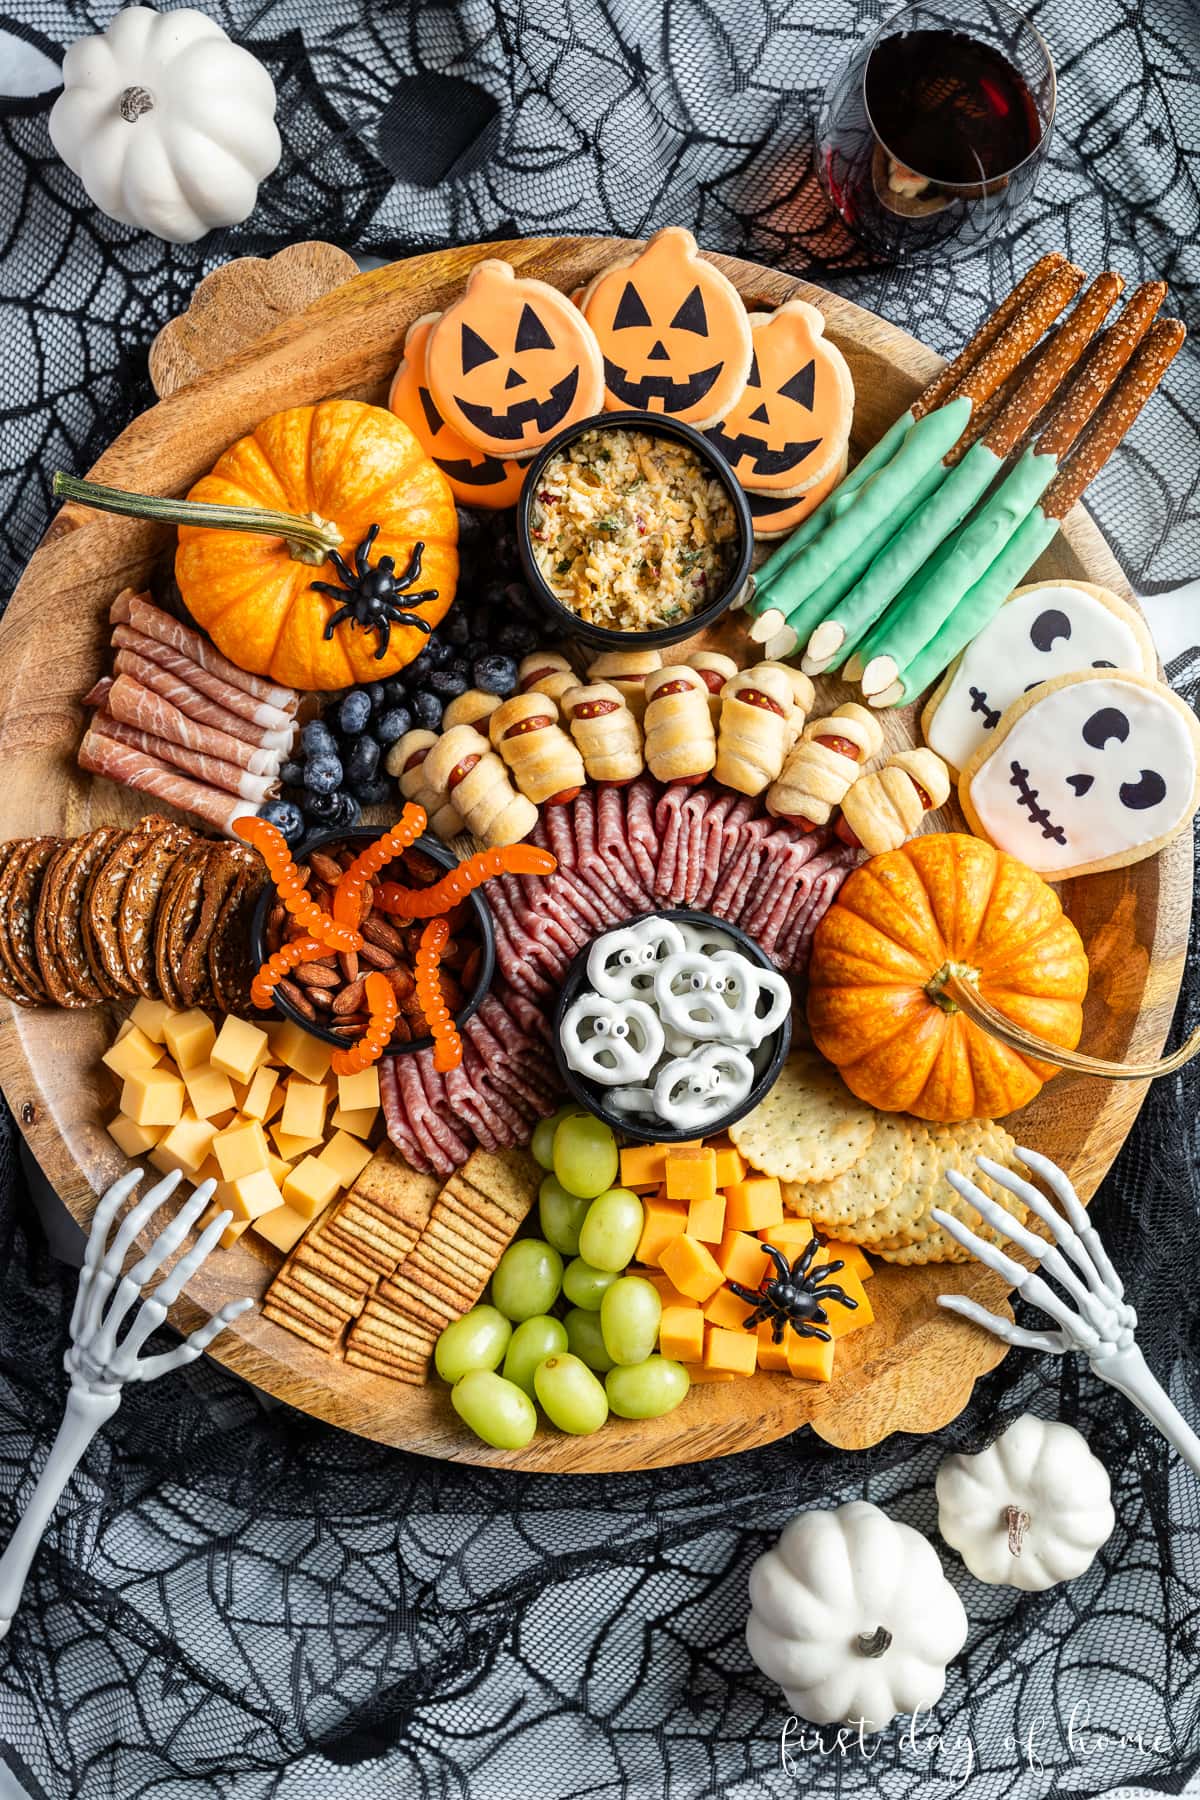 Halloween themed charcuterie board with mix of deli meats, cheeses, crackers, fruit, nuts, cookies, and other snacks.